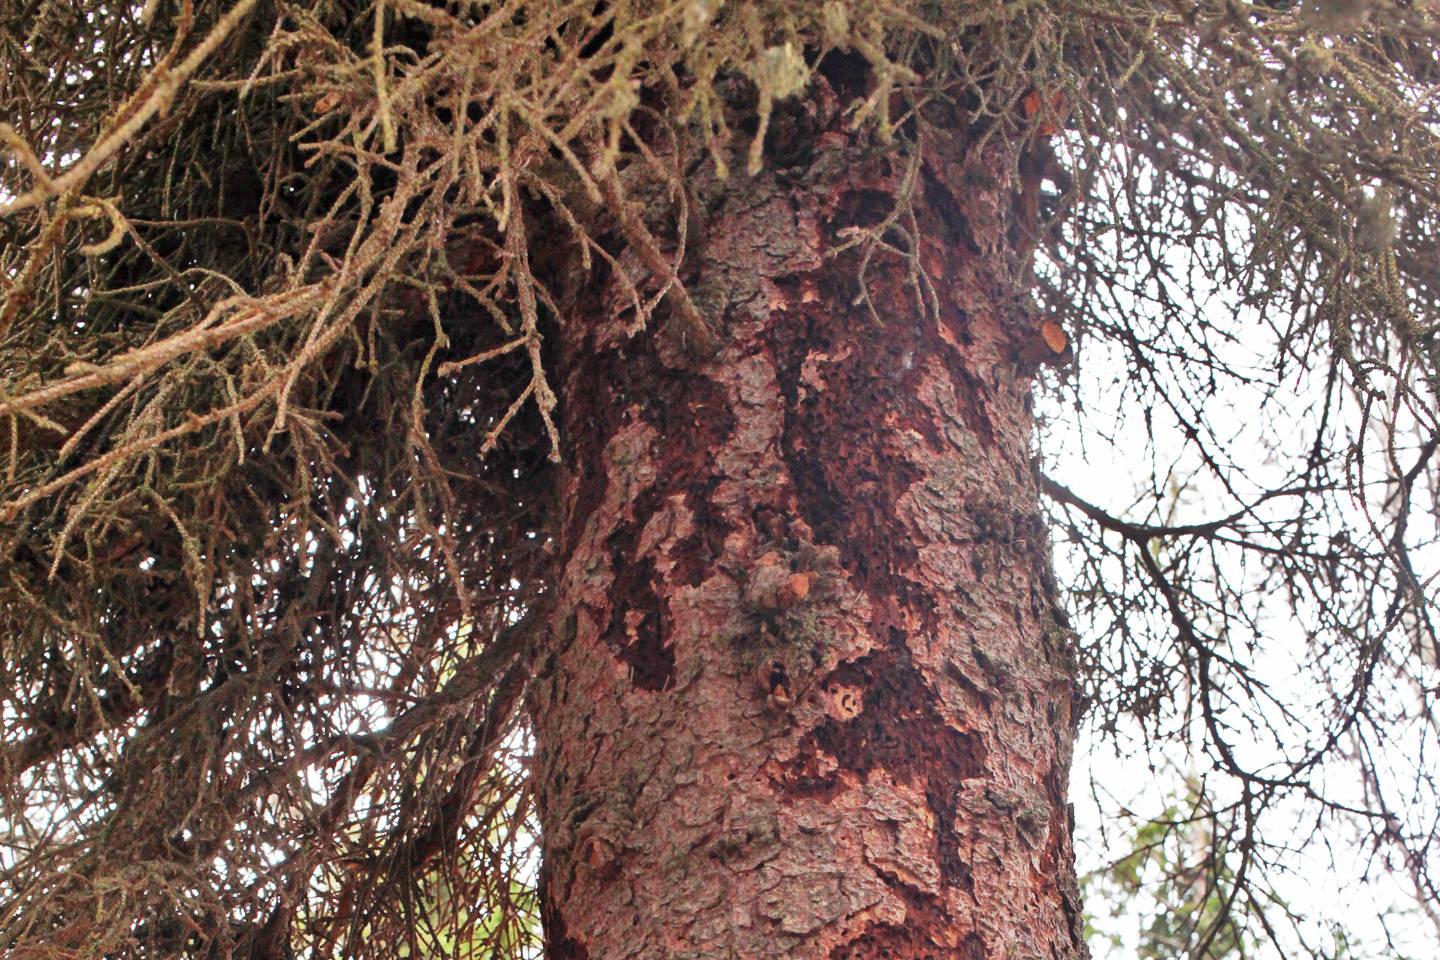 A spruce tree showing heavy damage from spruce bark beetles stands on Saturday, April 28, 2018 in Kenai, Alaska. (Ben Boetttger/Peninsula Clarion file)